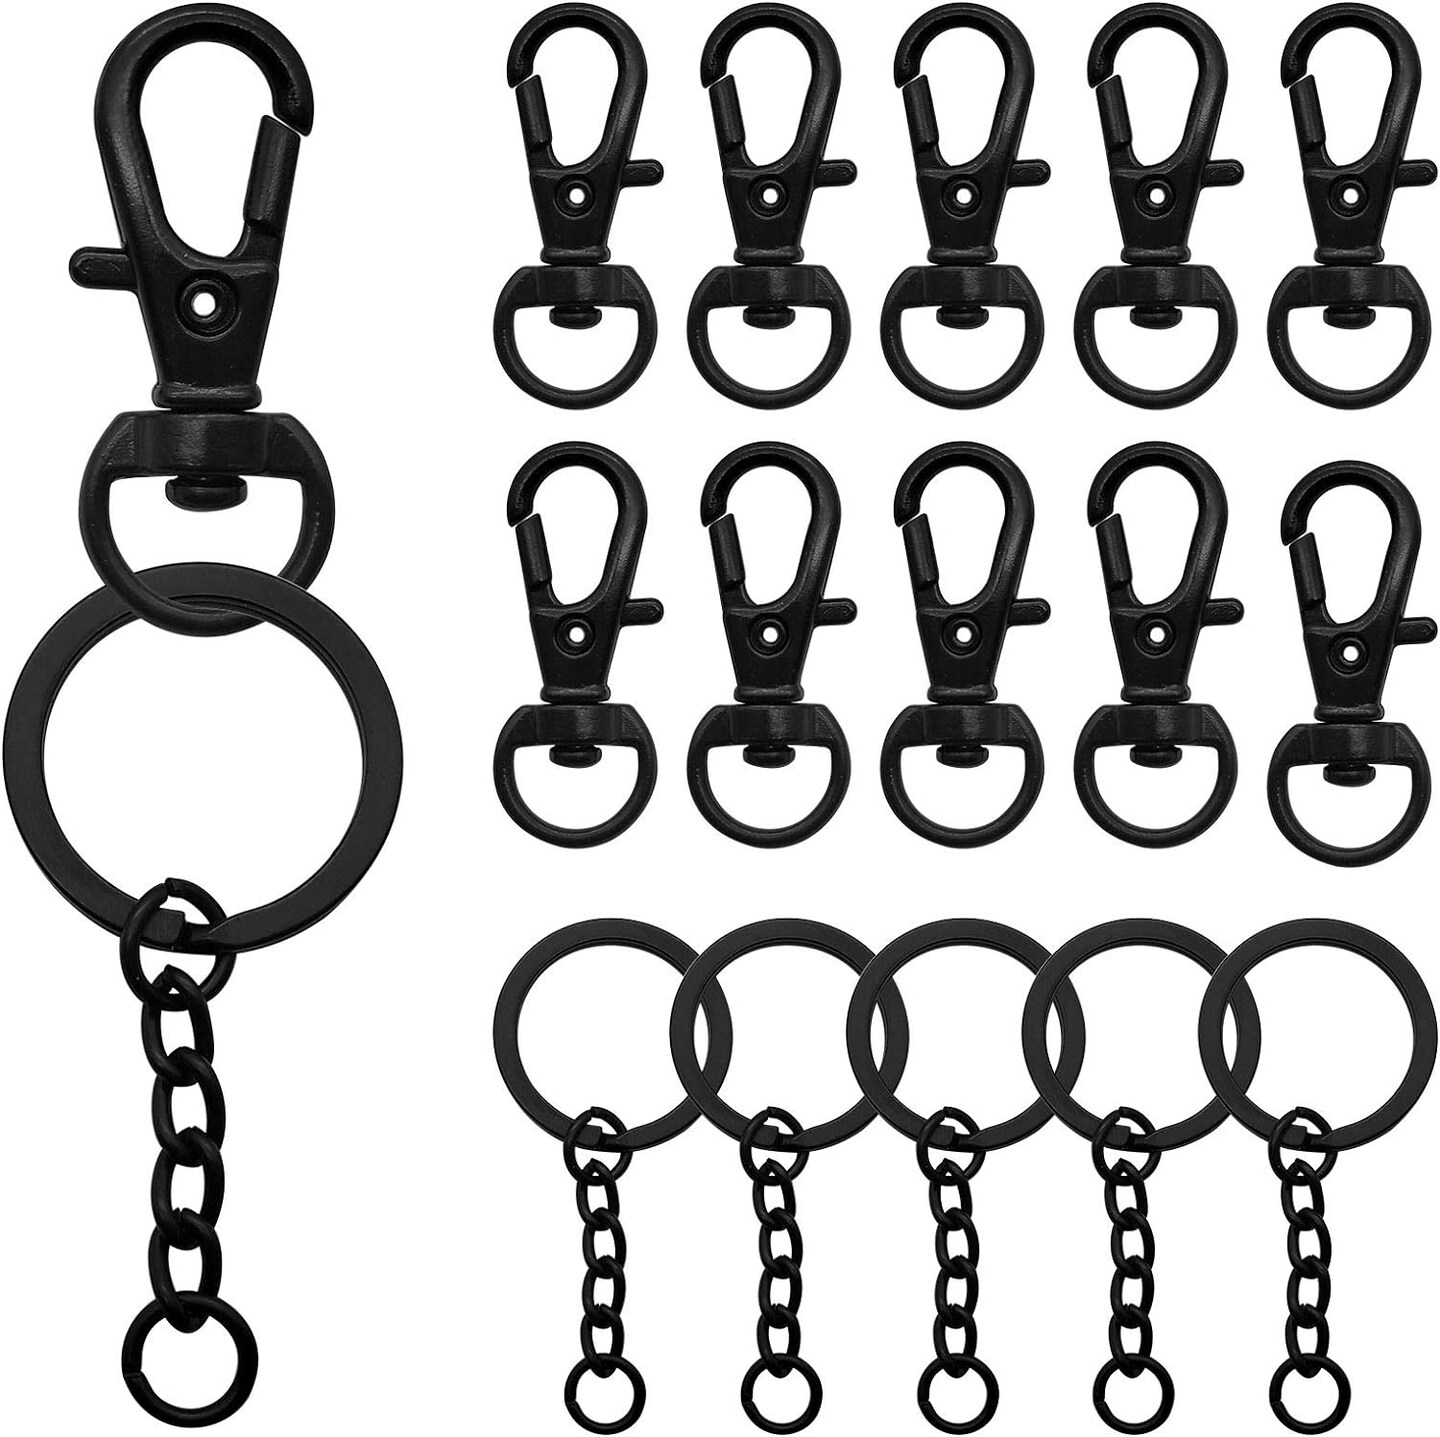 150Pcs Black Swivel Snap Hook Set,Swivel Clasp Keychain Hook Lobster Clasp Split Key Rings with Chain and Jump Rings Bulk for Keychain Lanyard,Jewelry,DIY Crafts Supplies